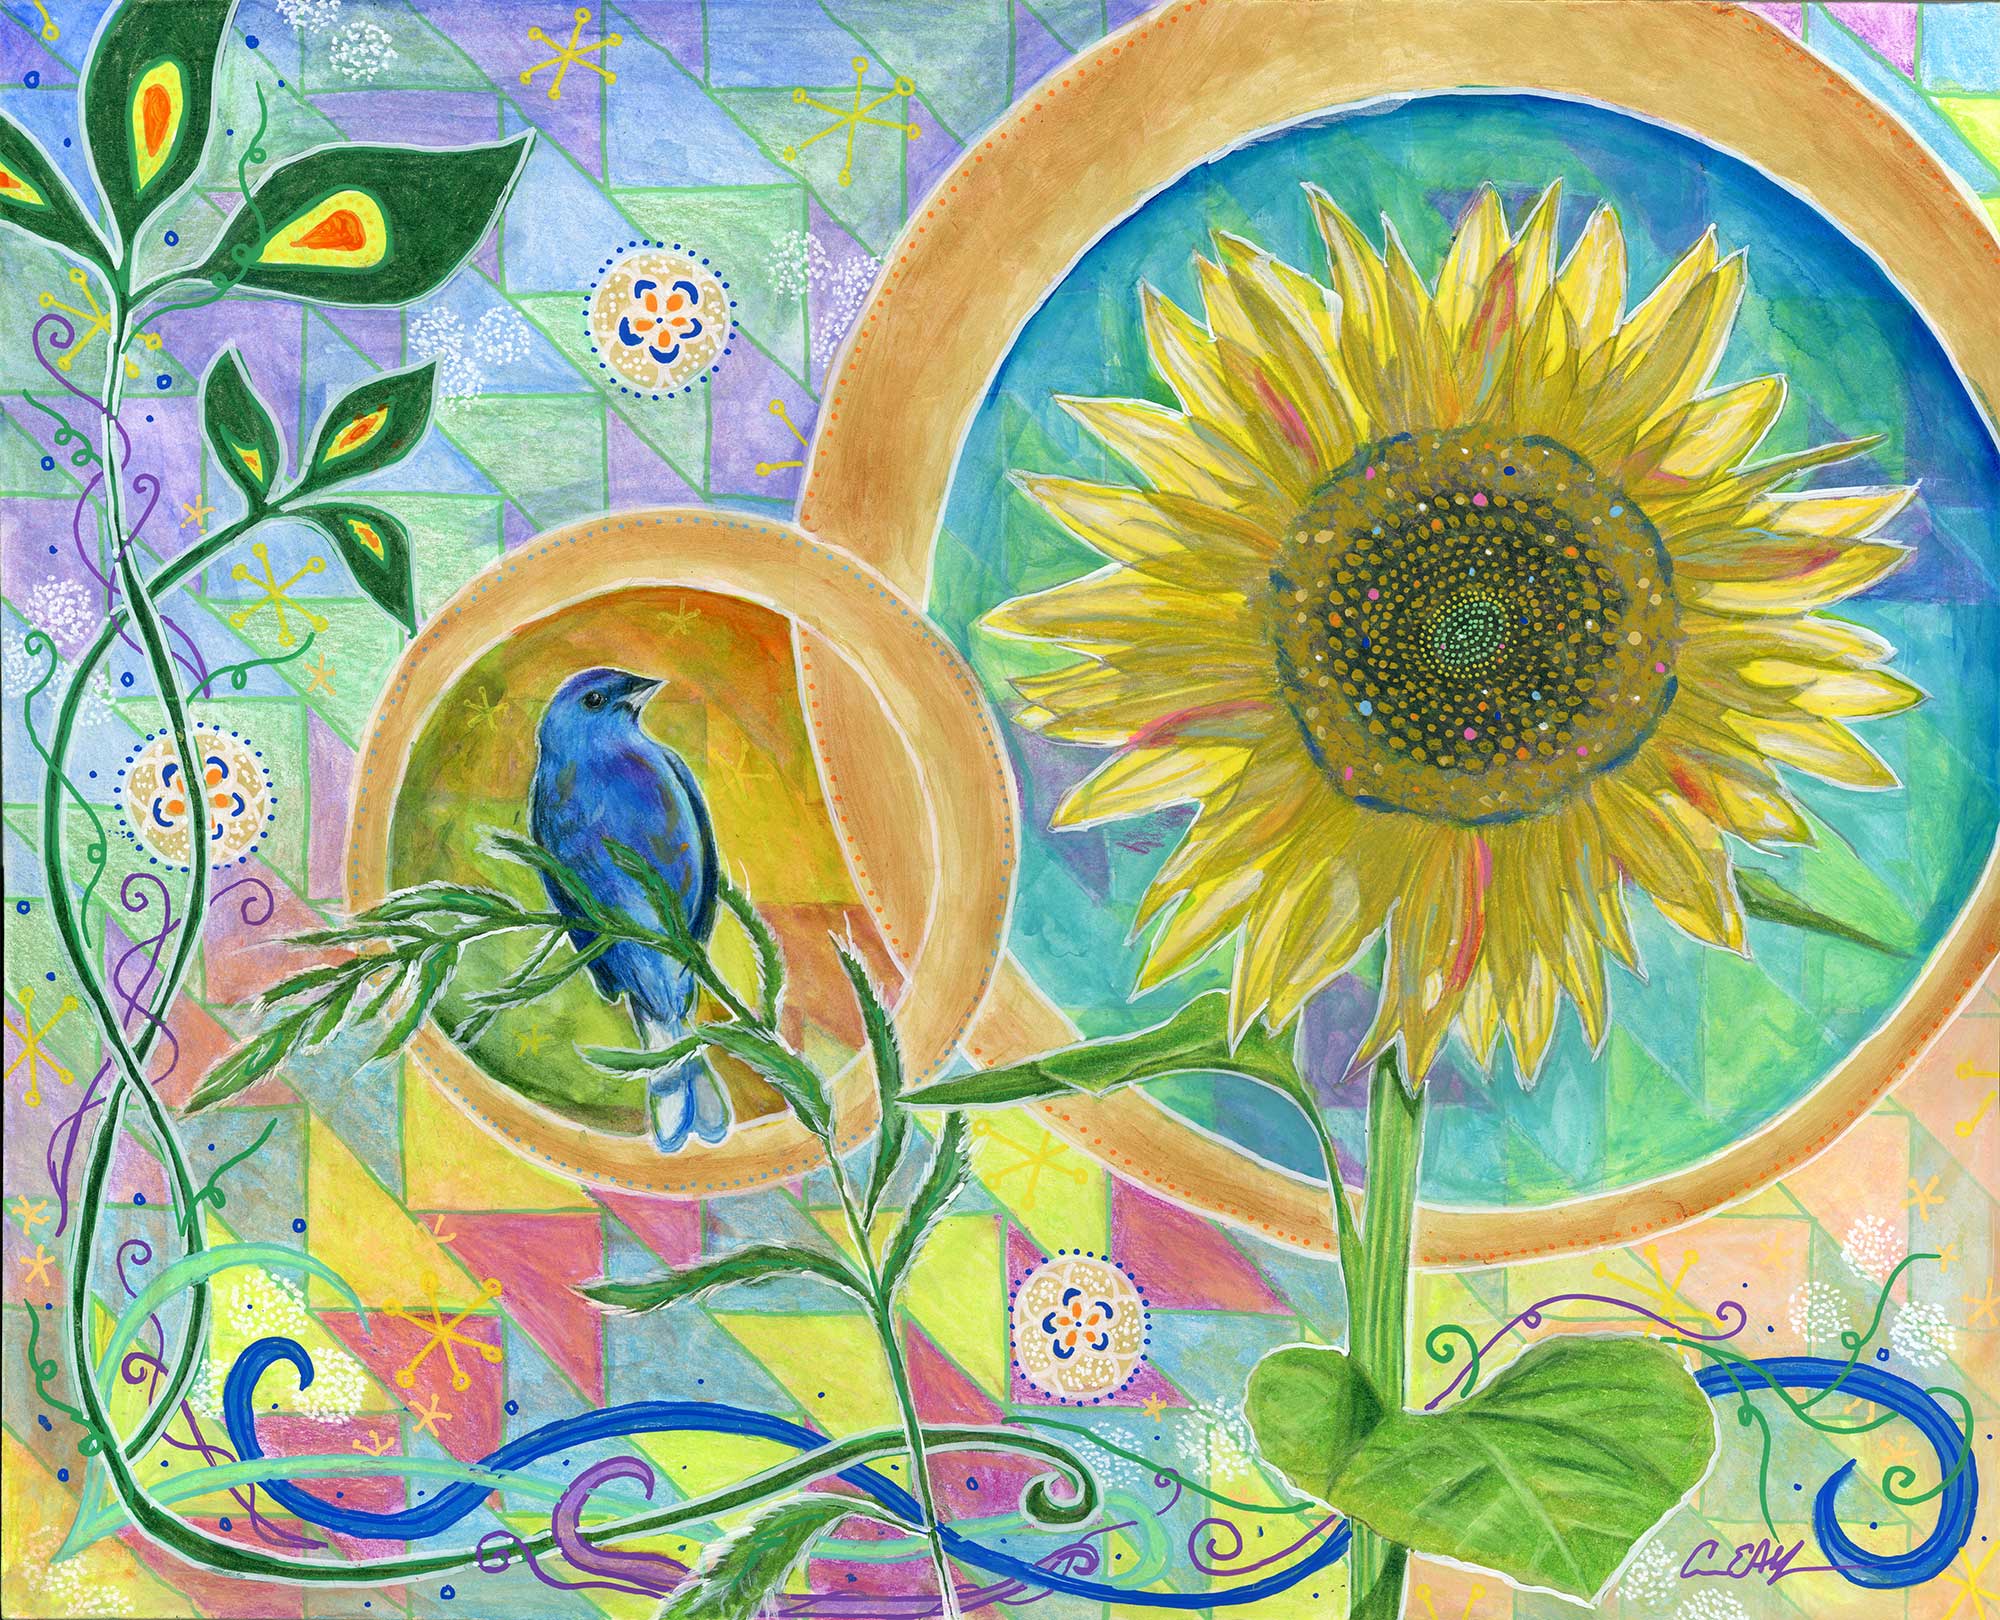 "Blue Bunting and Sunflower", 20" x 16", mixed media